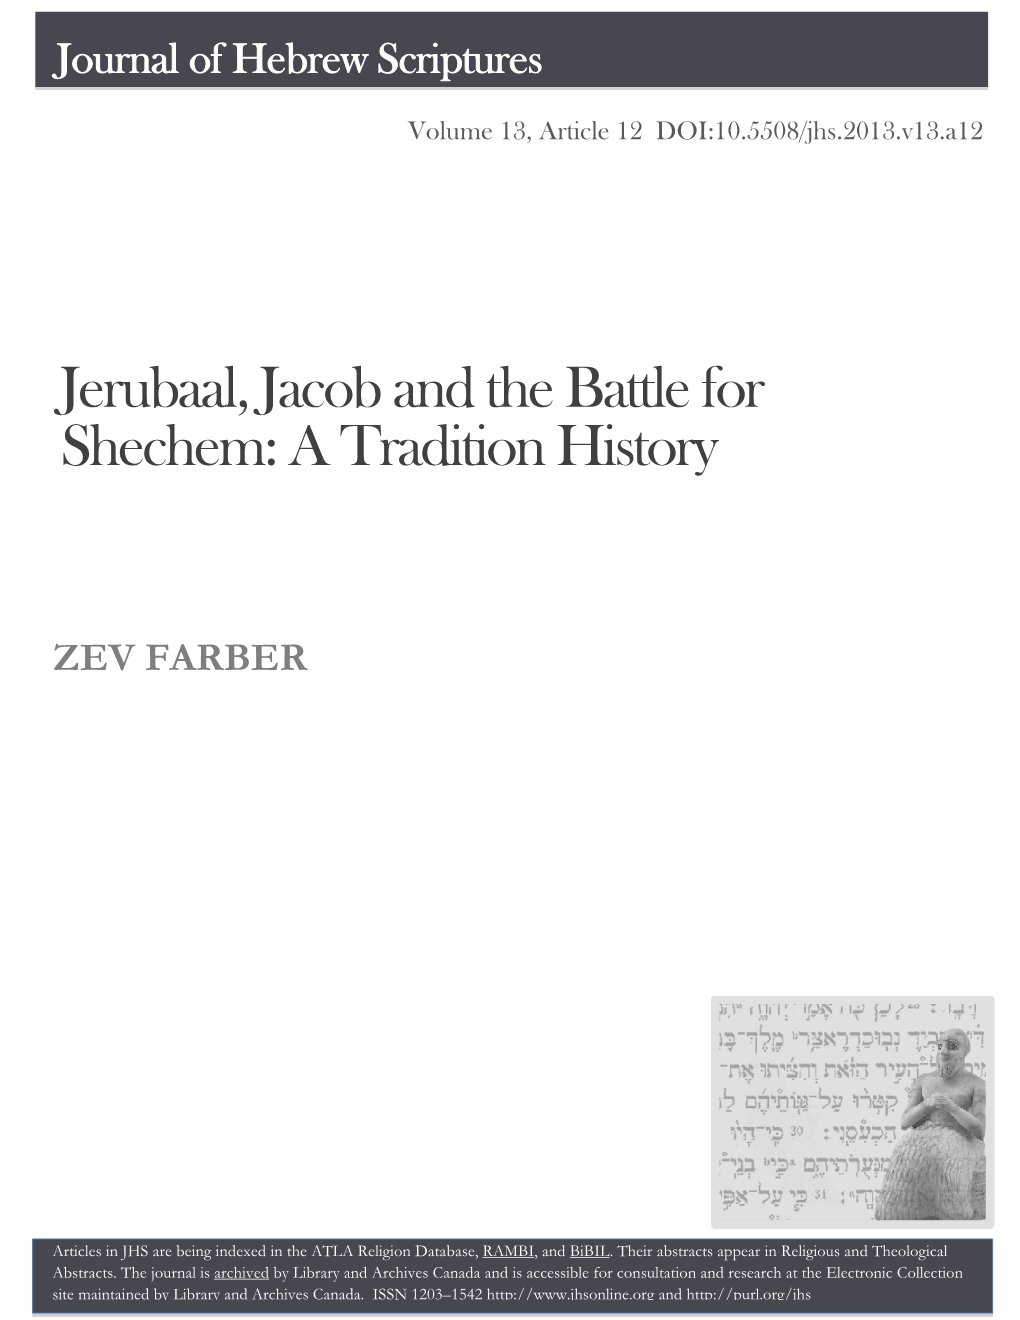 Jerubaal, Jacob and the Battle for Shechem: a Tradition History